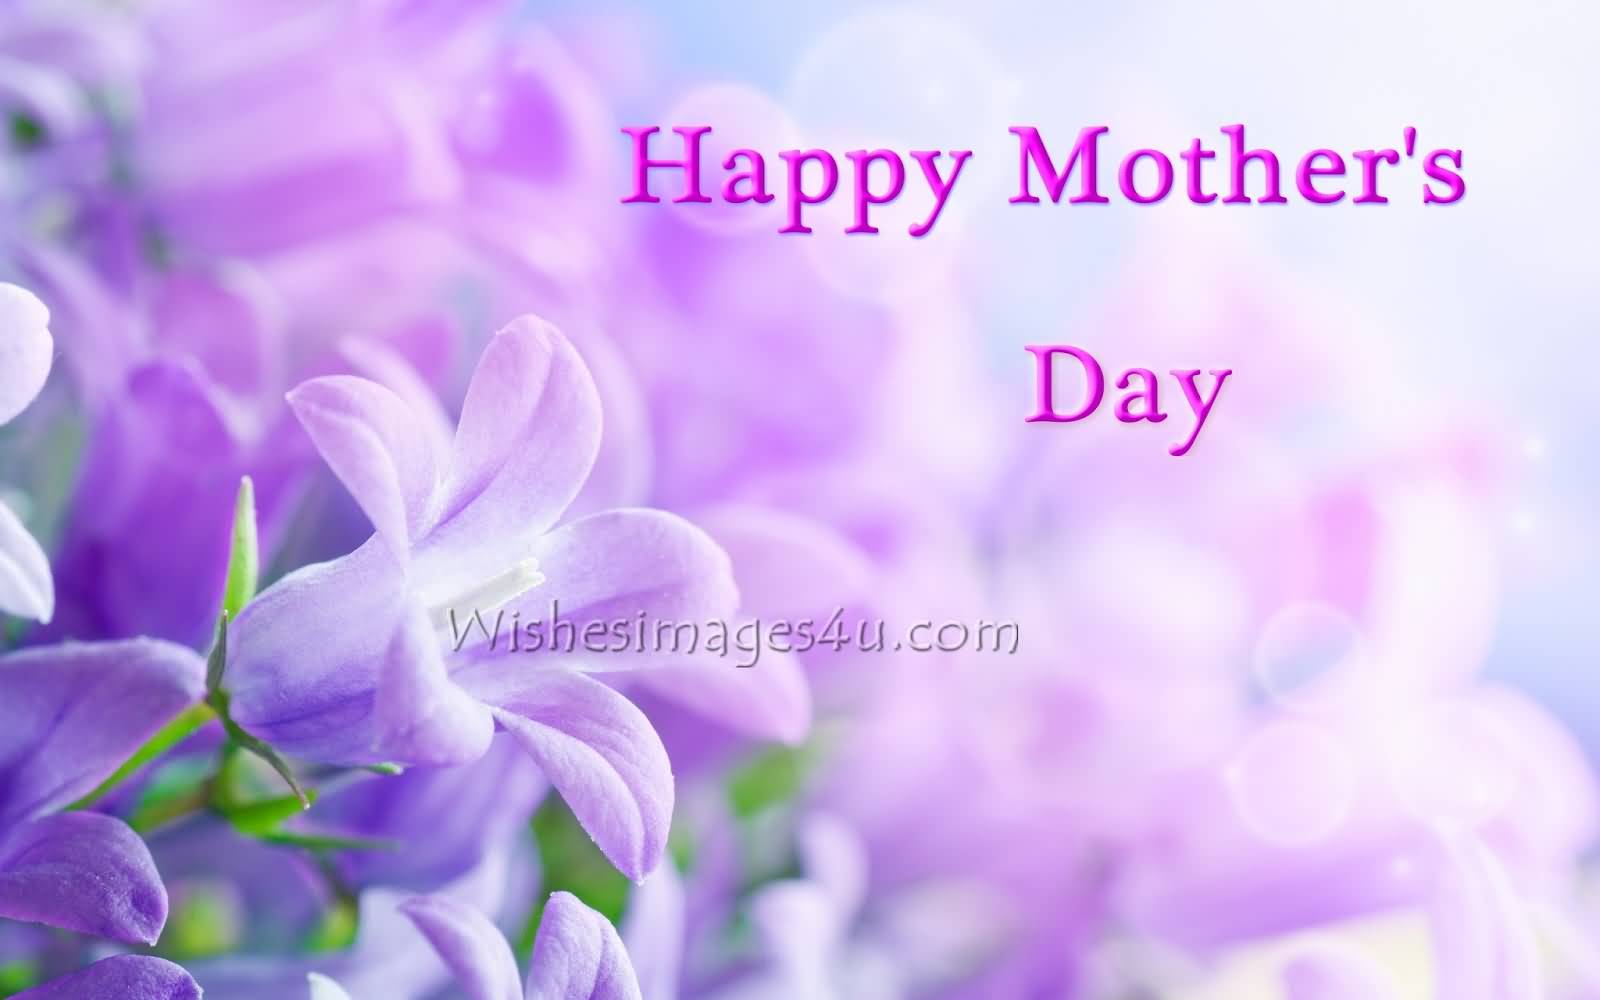 Happy Mother's Day Wishes Wallpaper